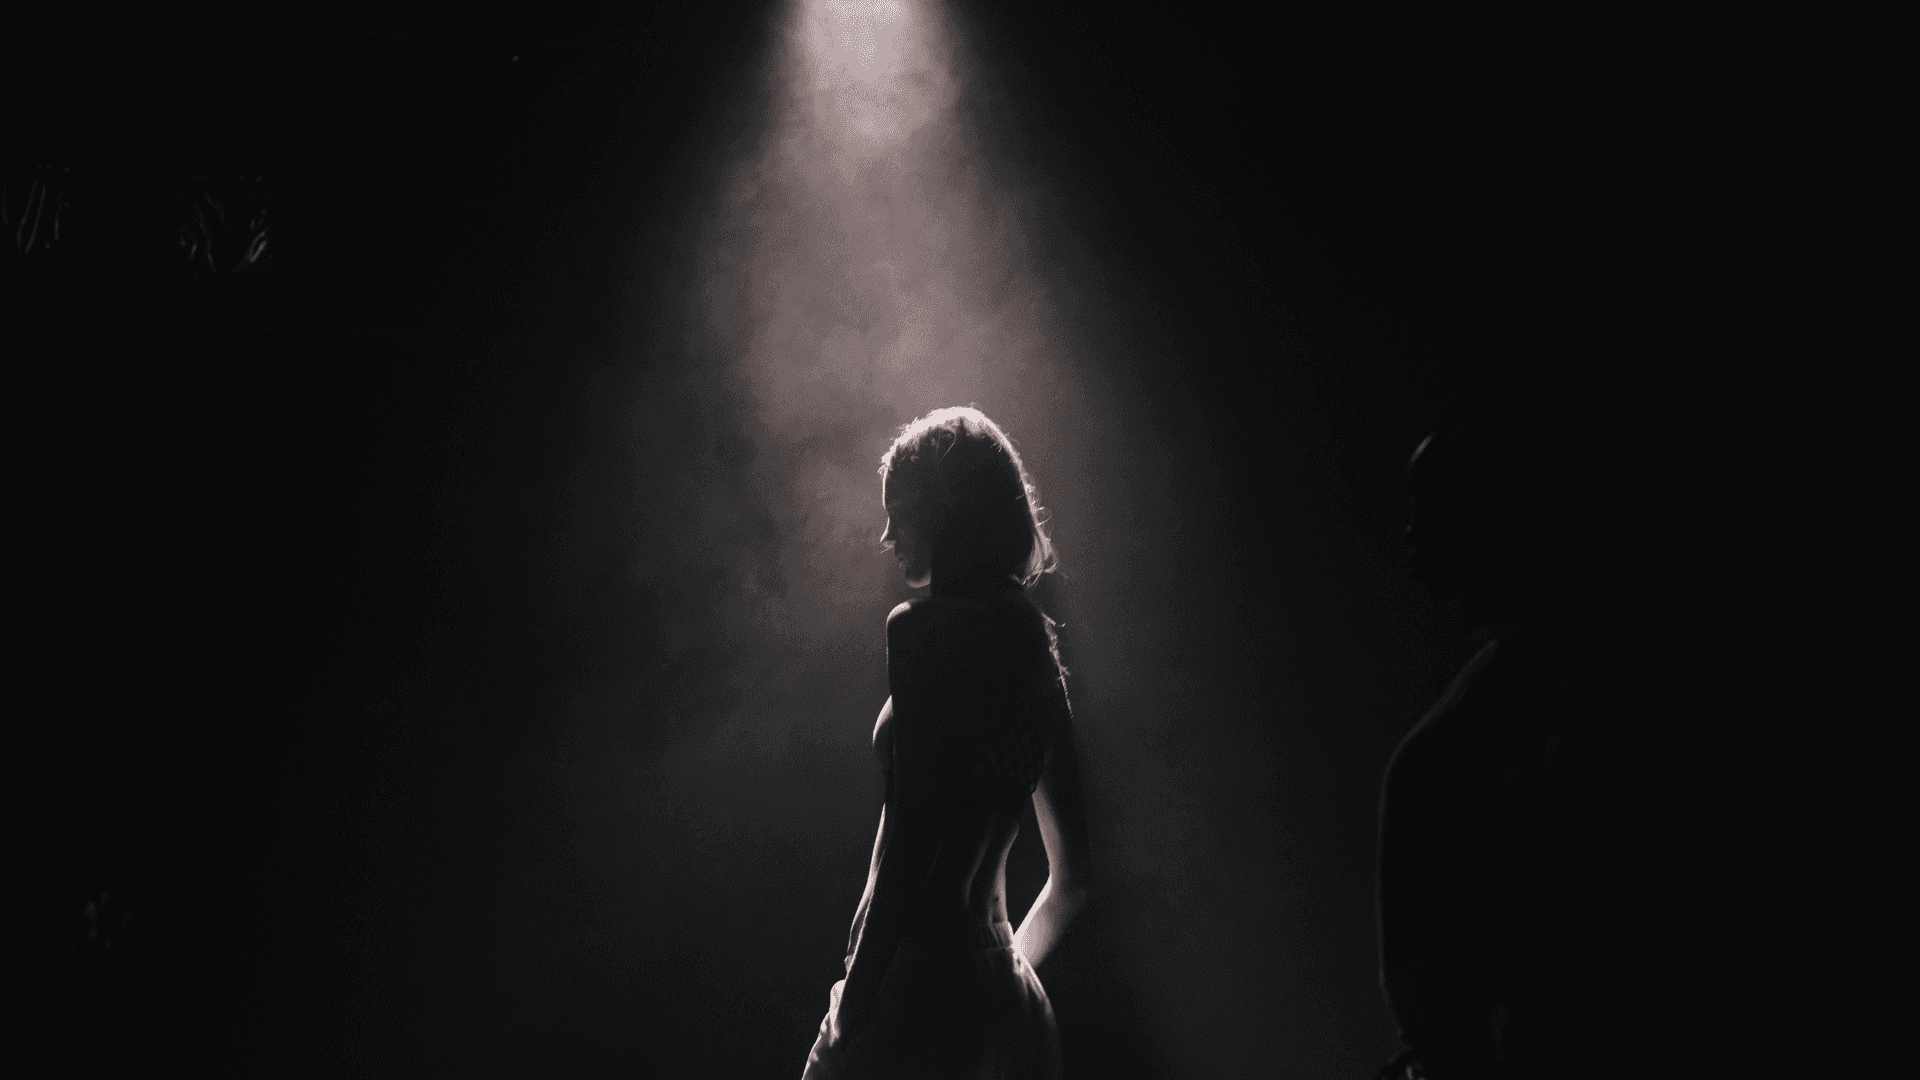 Silhouette Of A Woman Standing In The Dark